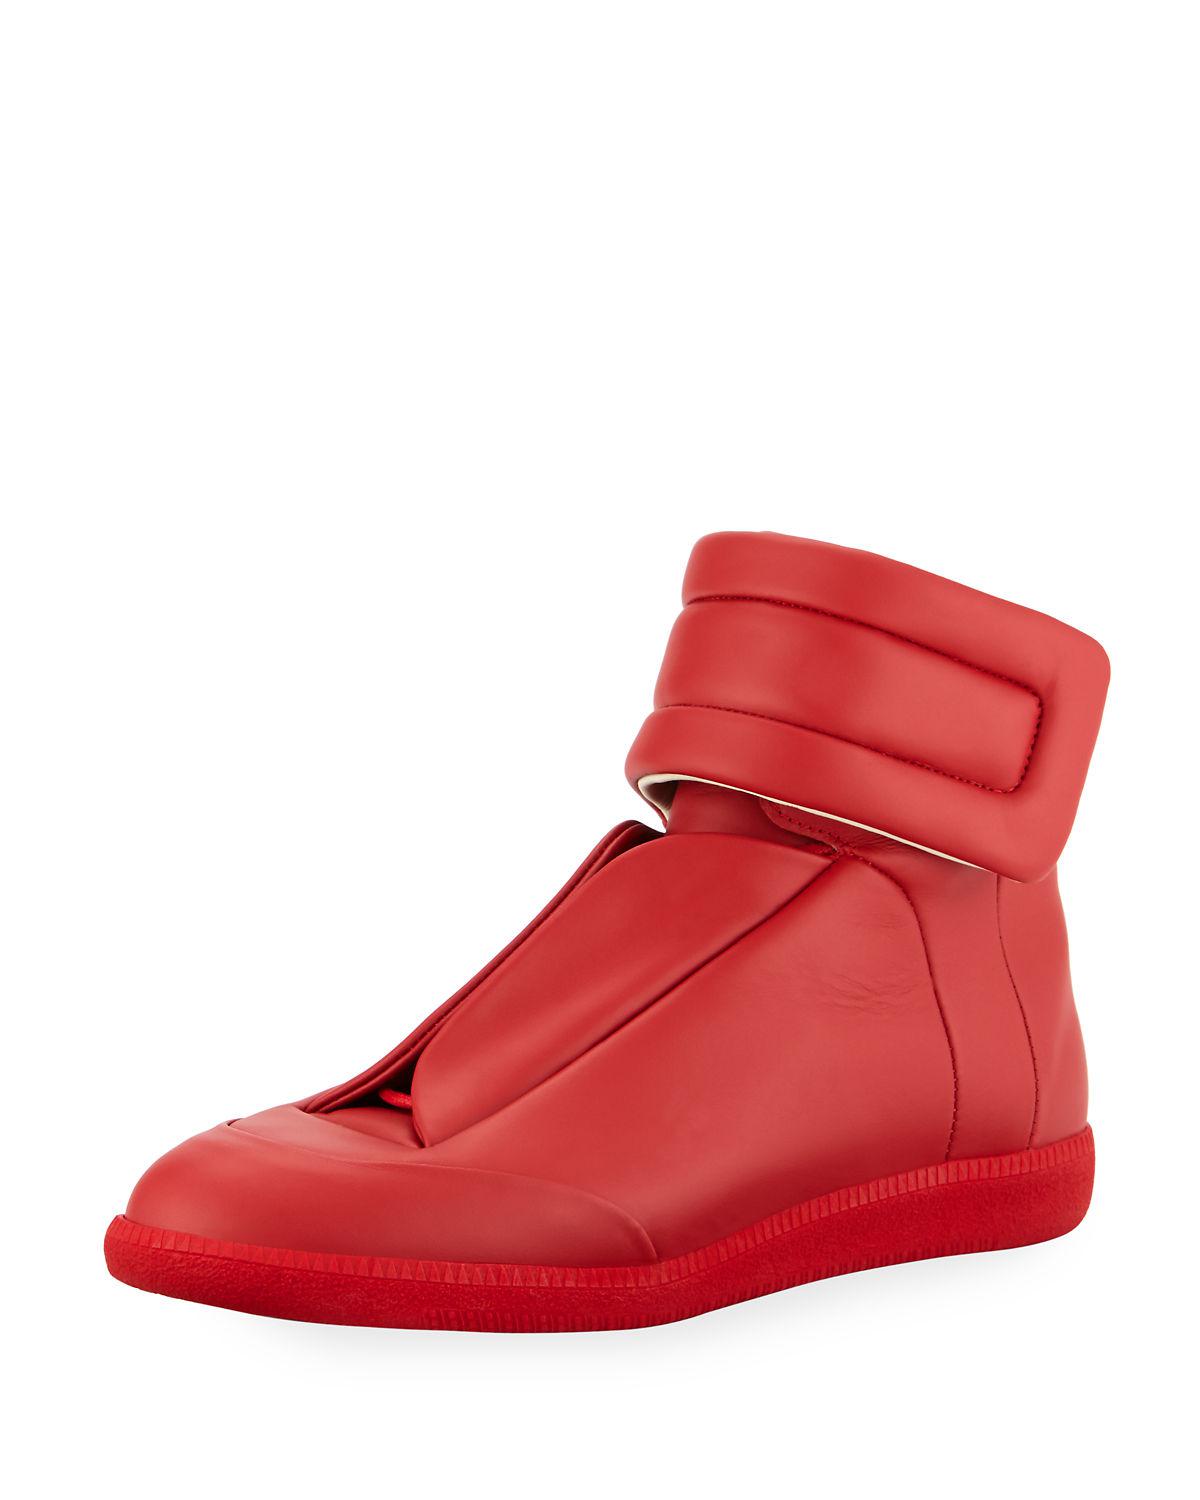 Maison Margiela Future Soft Leather High Top Sneakers in Red for Men - Lyst